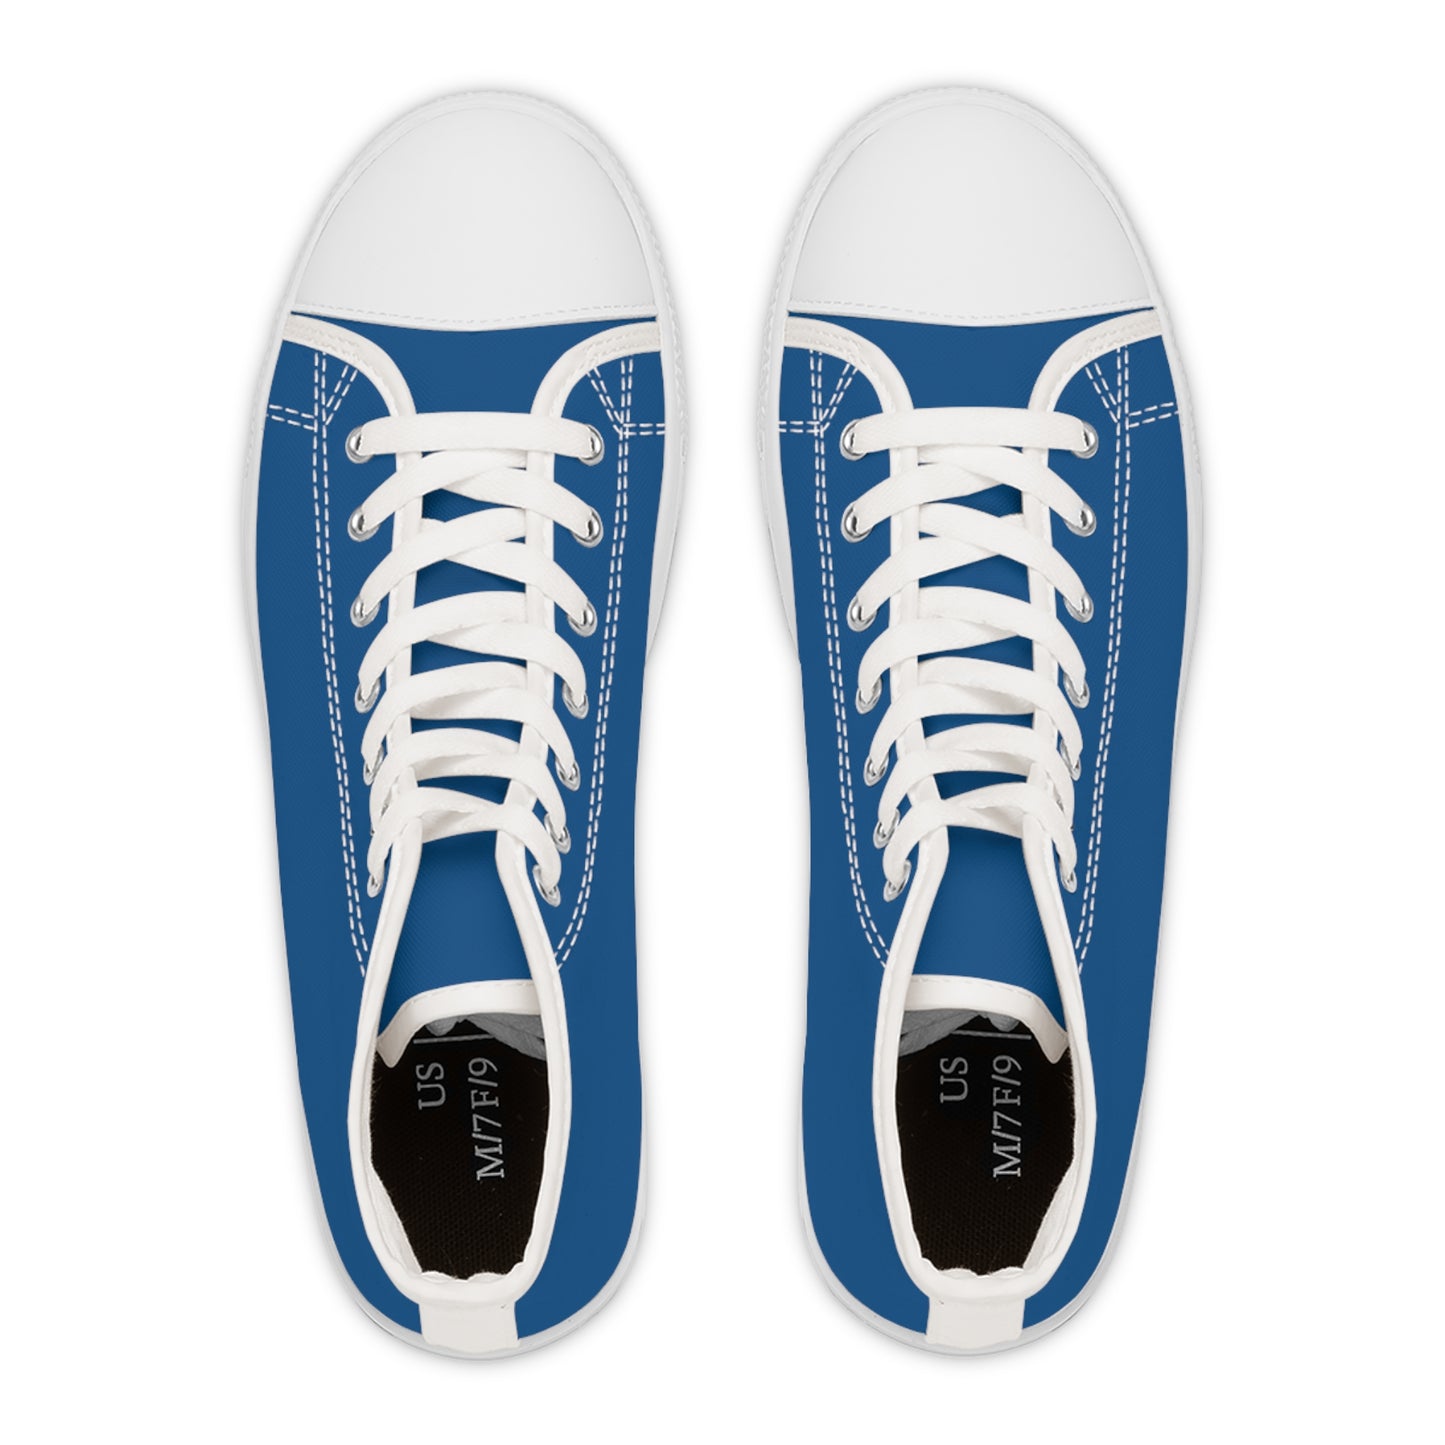 Women's Canvas High Top Solid Color Sneakers - Rich Blue US 12 White sole